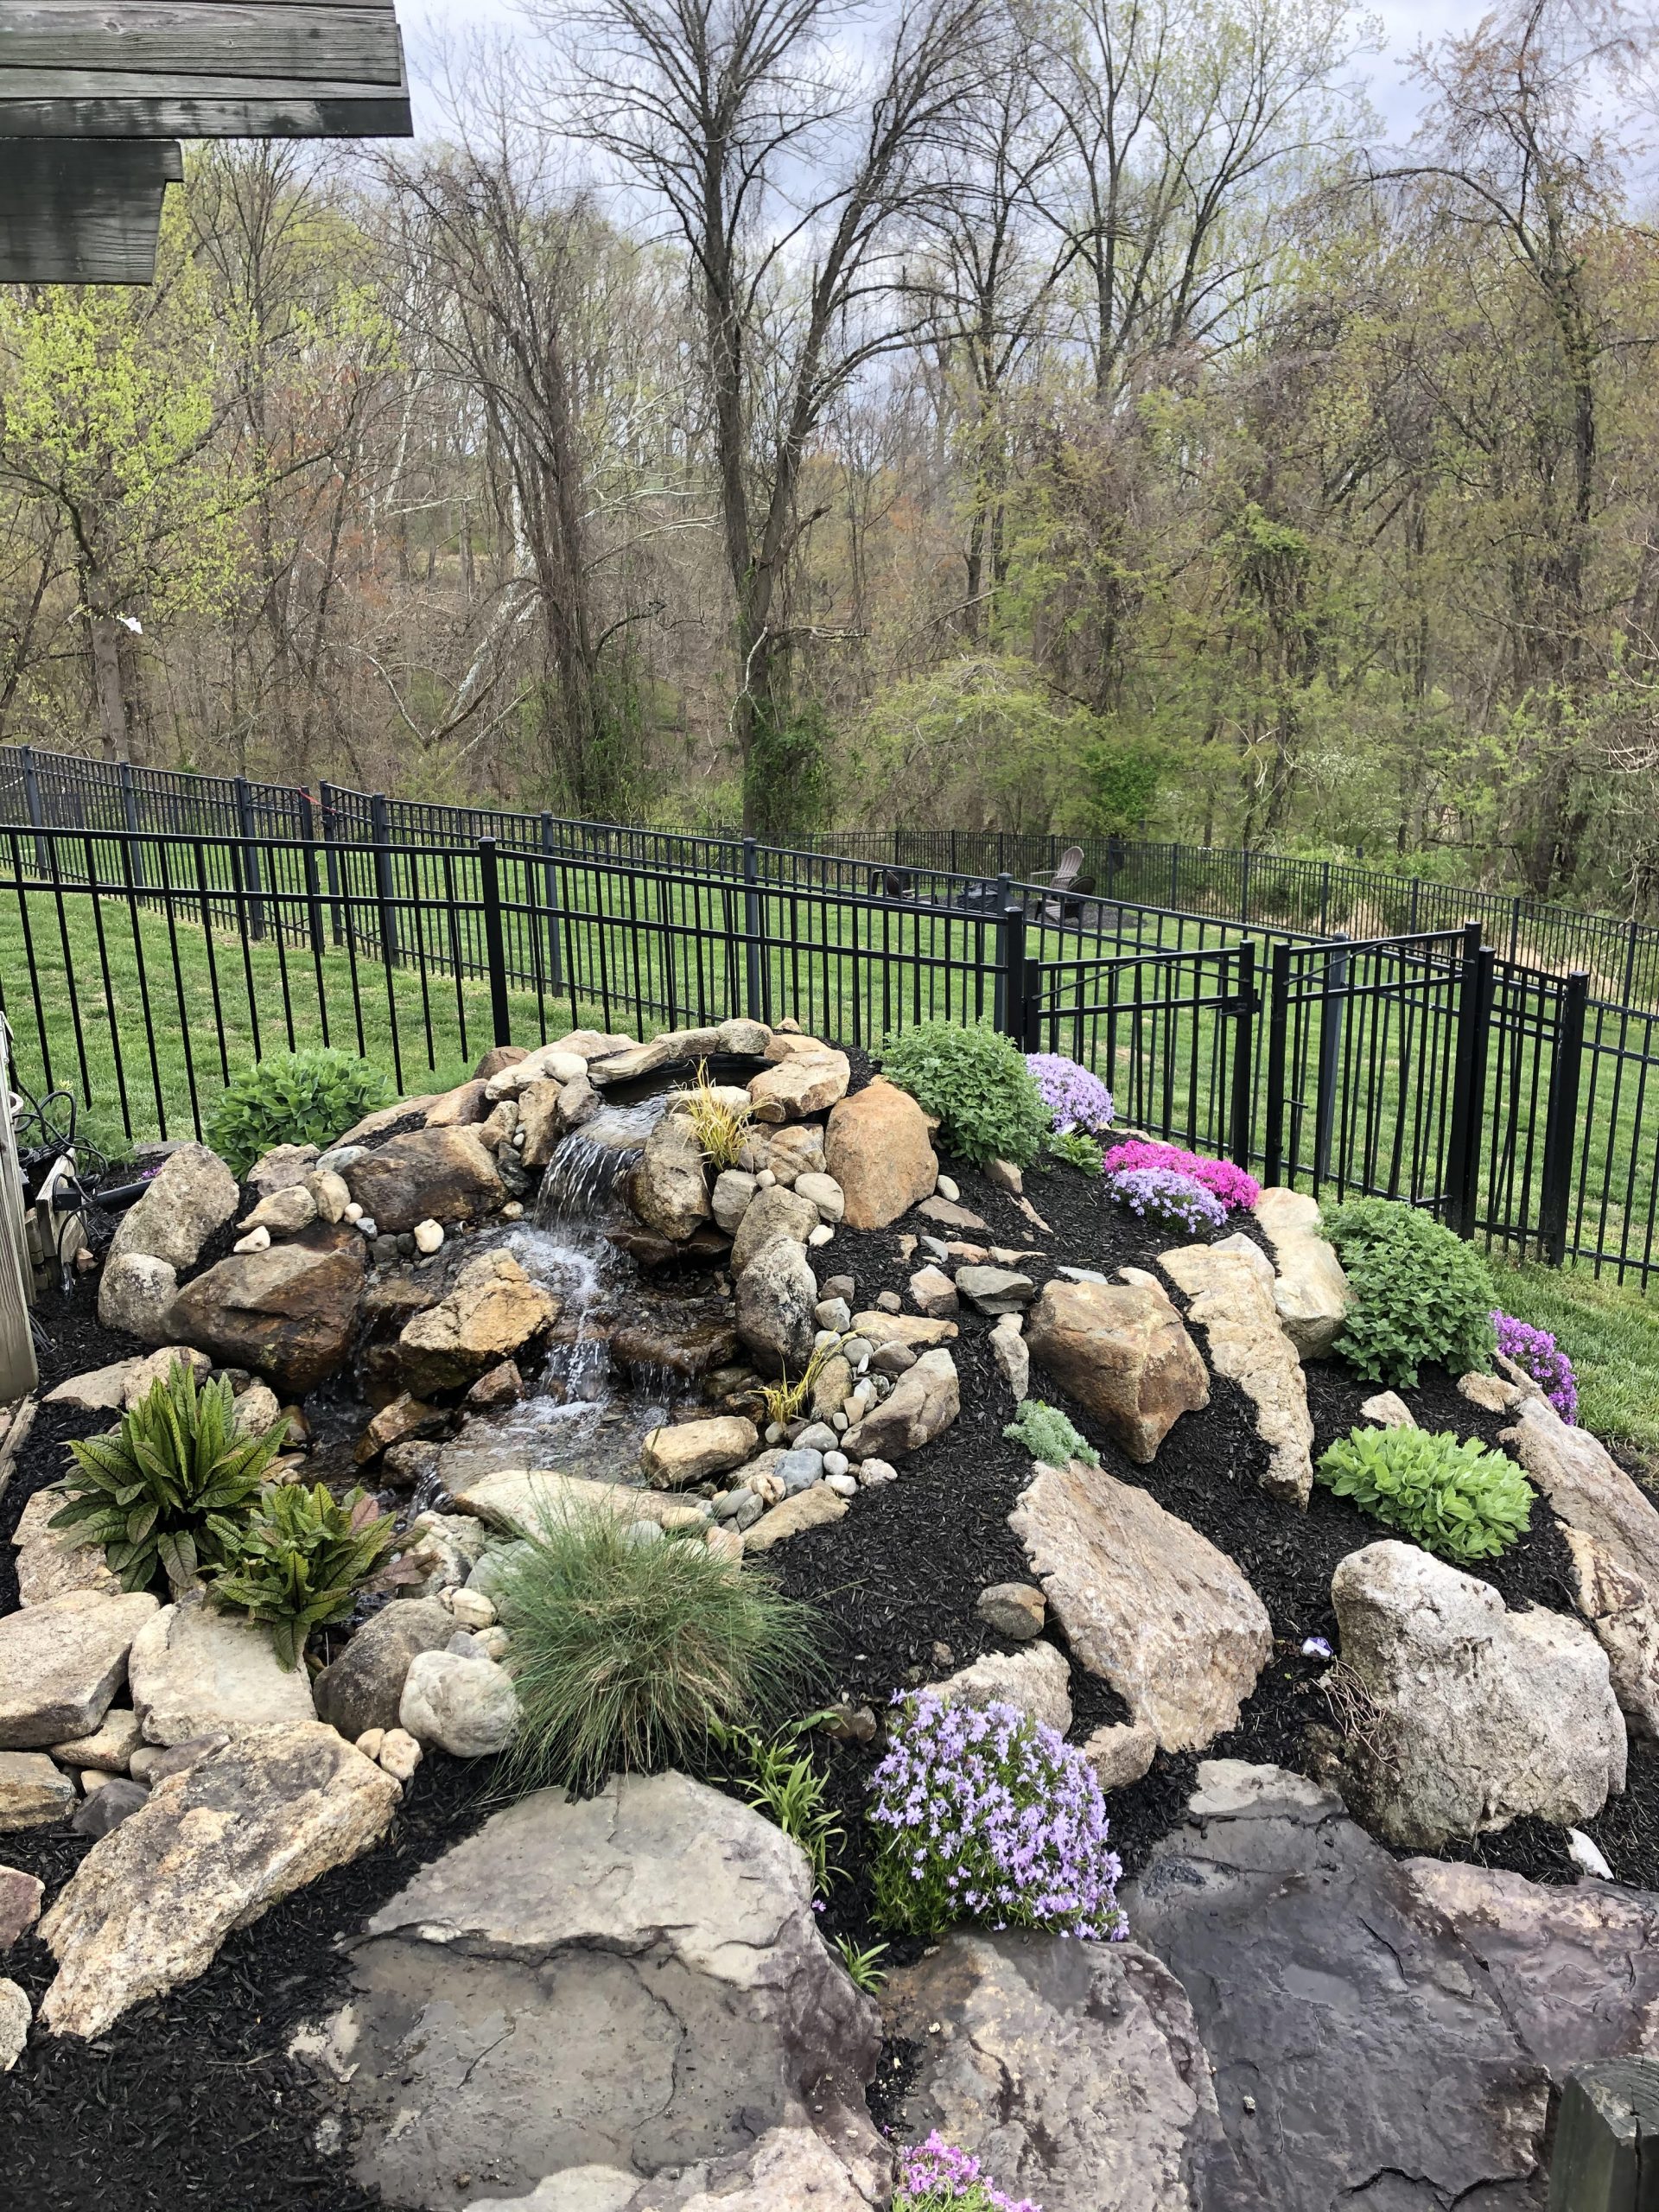 Residential & Commercial Landscaping Services, Residential Landscaping Contractor & Commercial Landscaping Contractor. Professional Landscape Designer